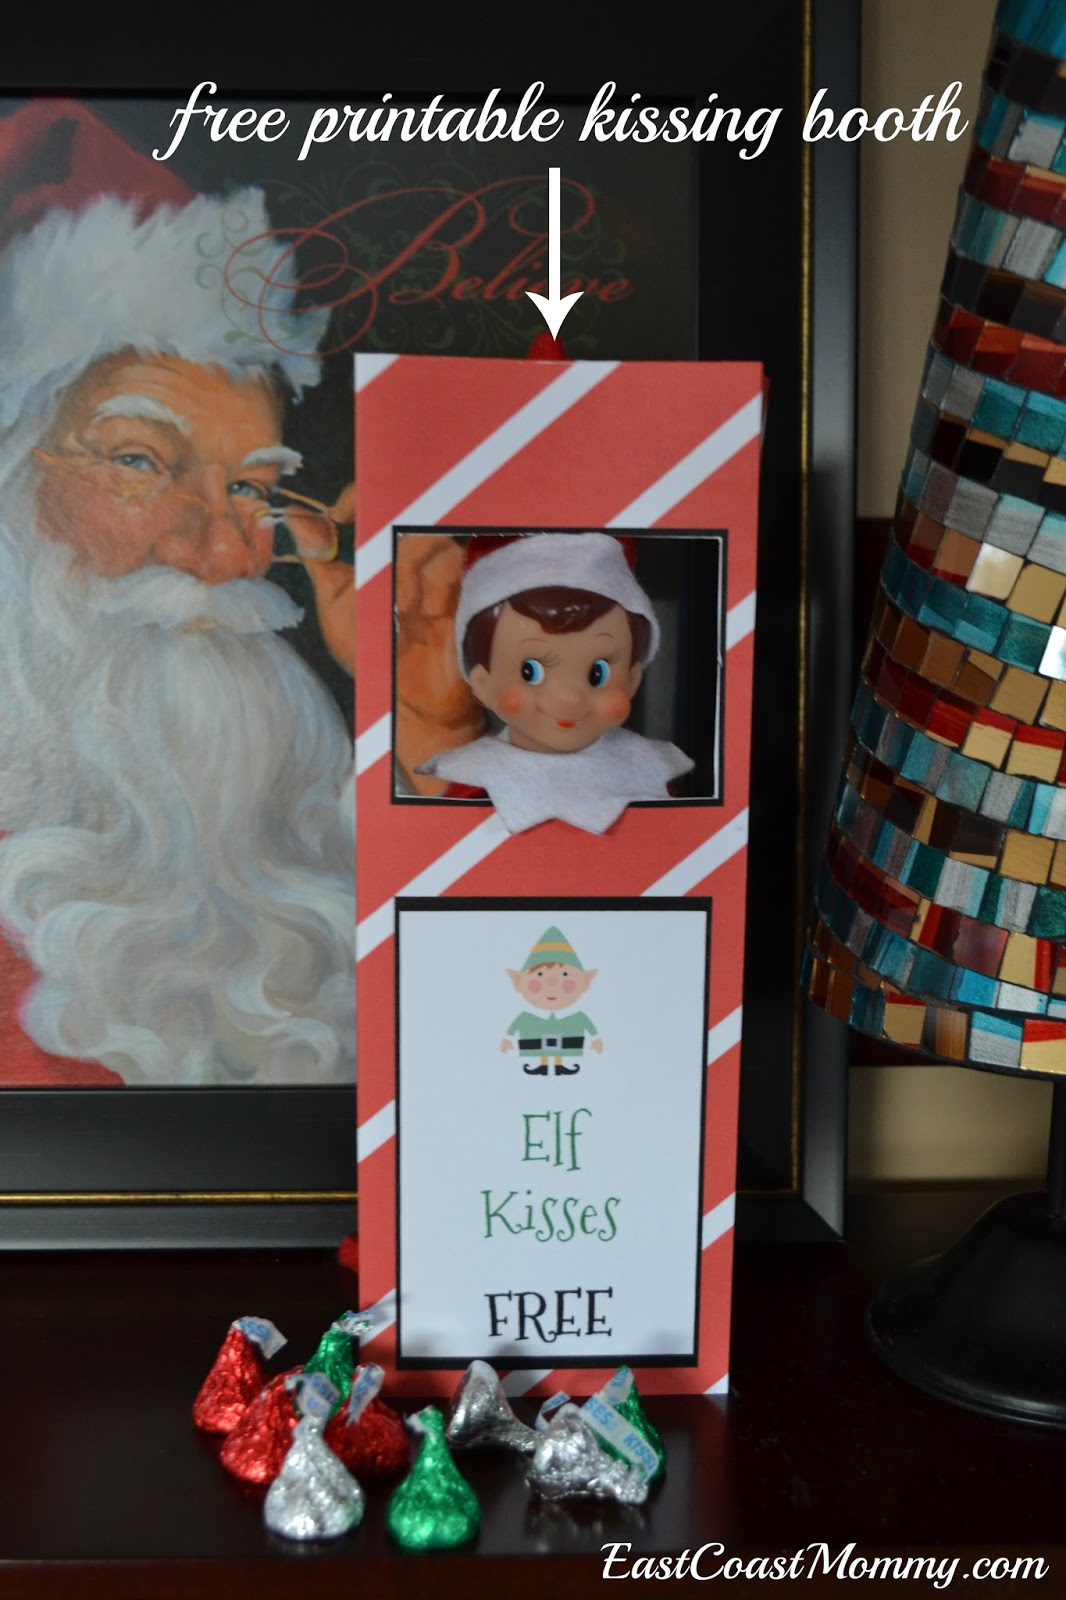 East Coast Mommy: Elf Kissing Booth (Free Printable) - Elf On The Shelf Kissing Booth Free Printable